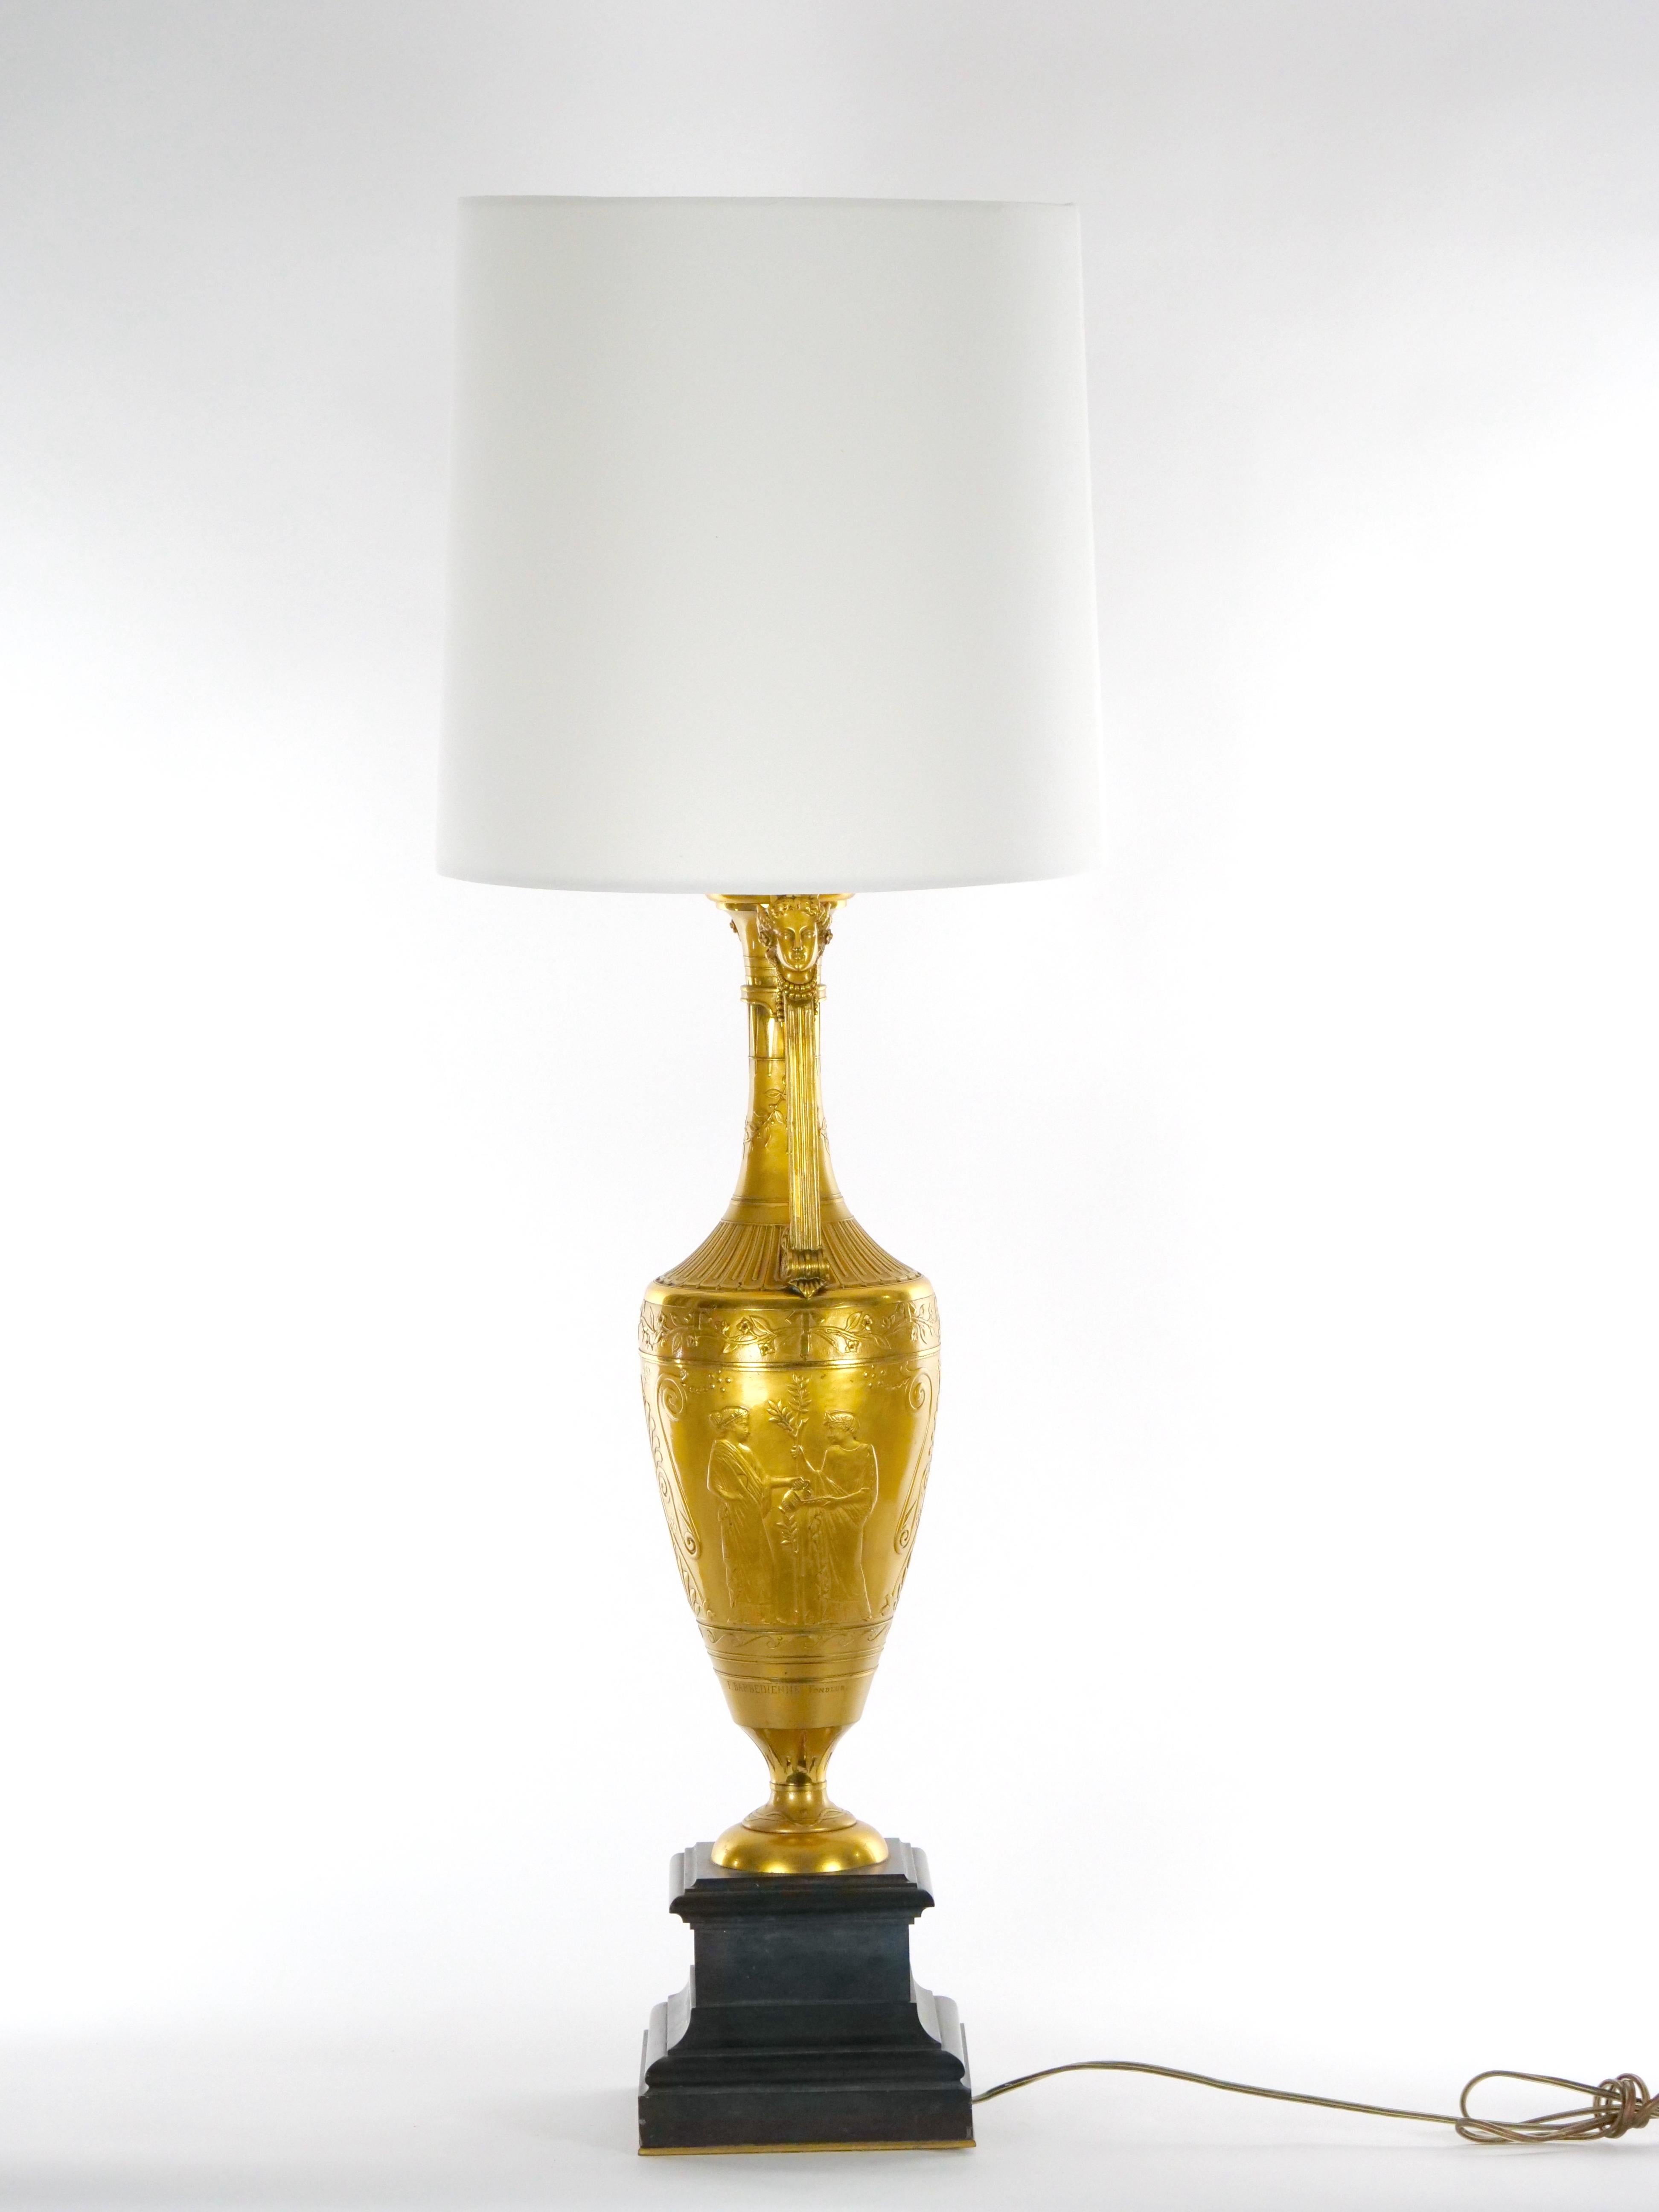 Exceptional gilt bronze and black marble base table lamp. Made by the famed maker F. Barbedienne the lamp was crafted from black squared marble base and gilt bronze in the Napoleon III style. The lamp features an amphora urn shape form with two side